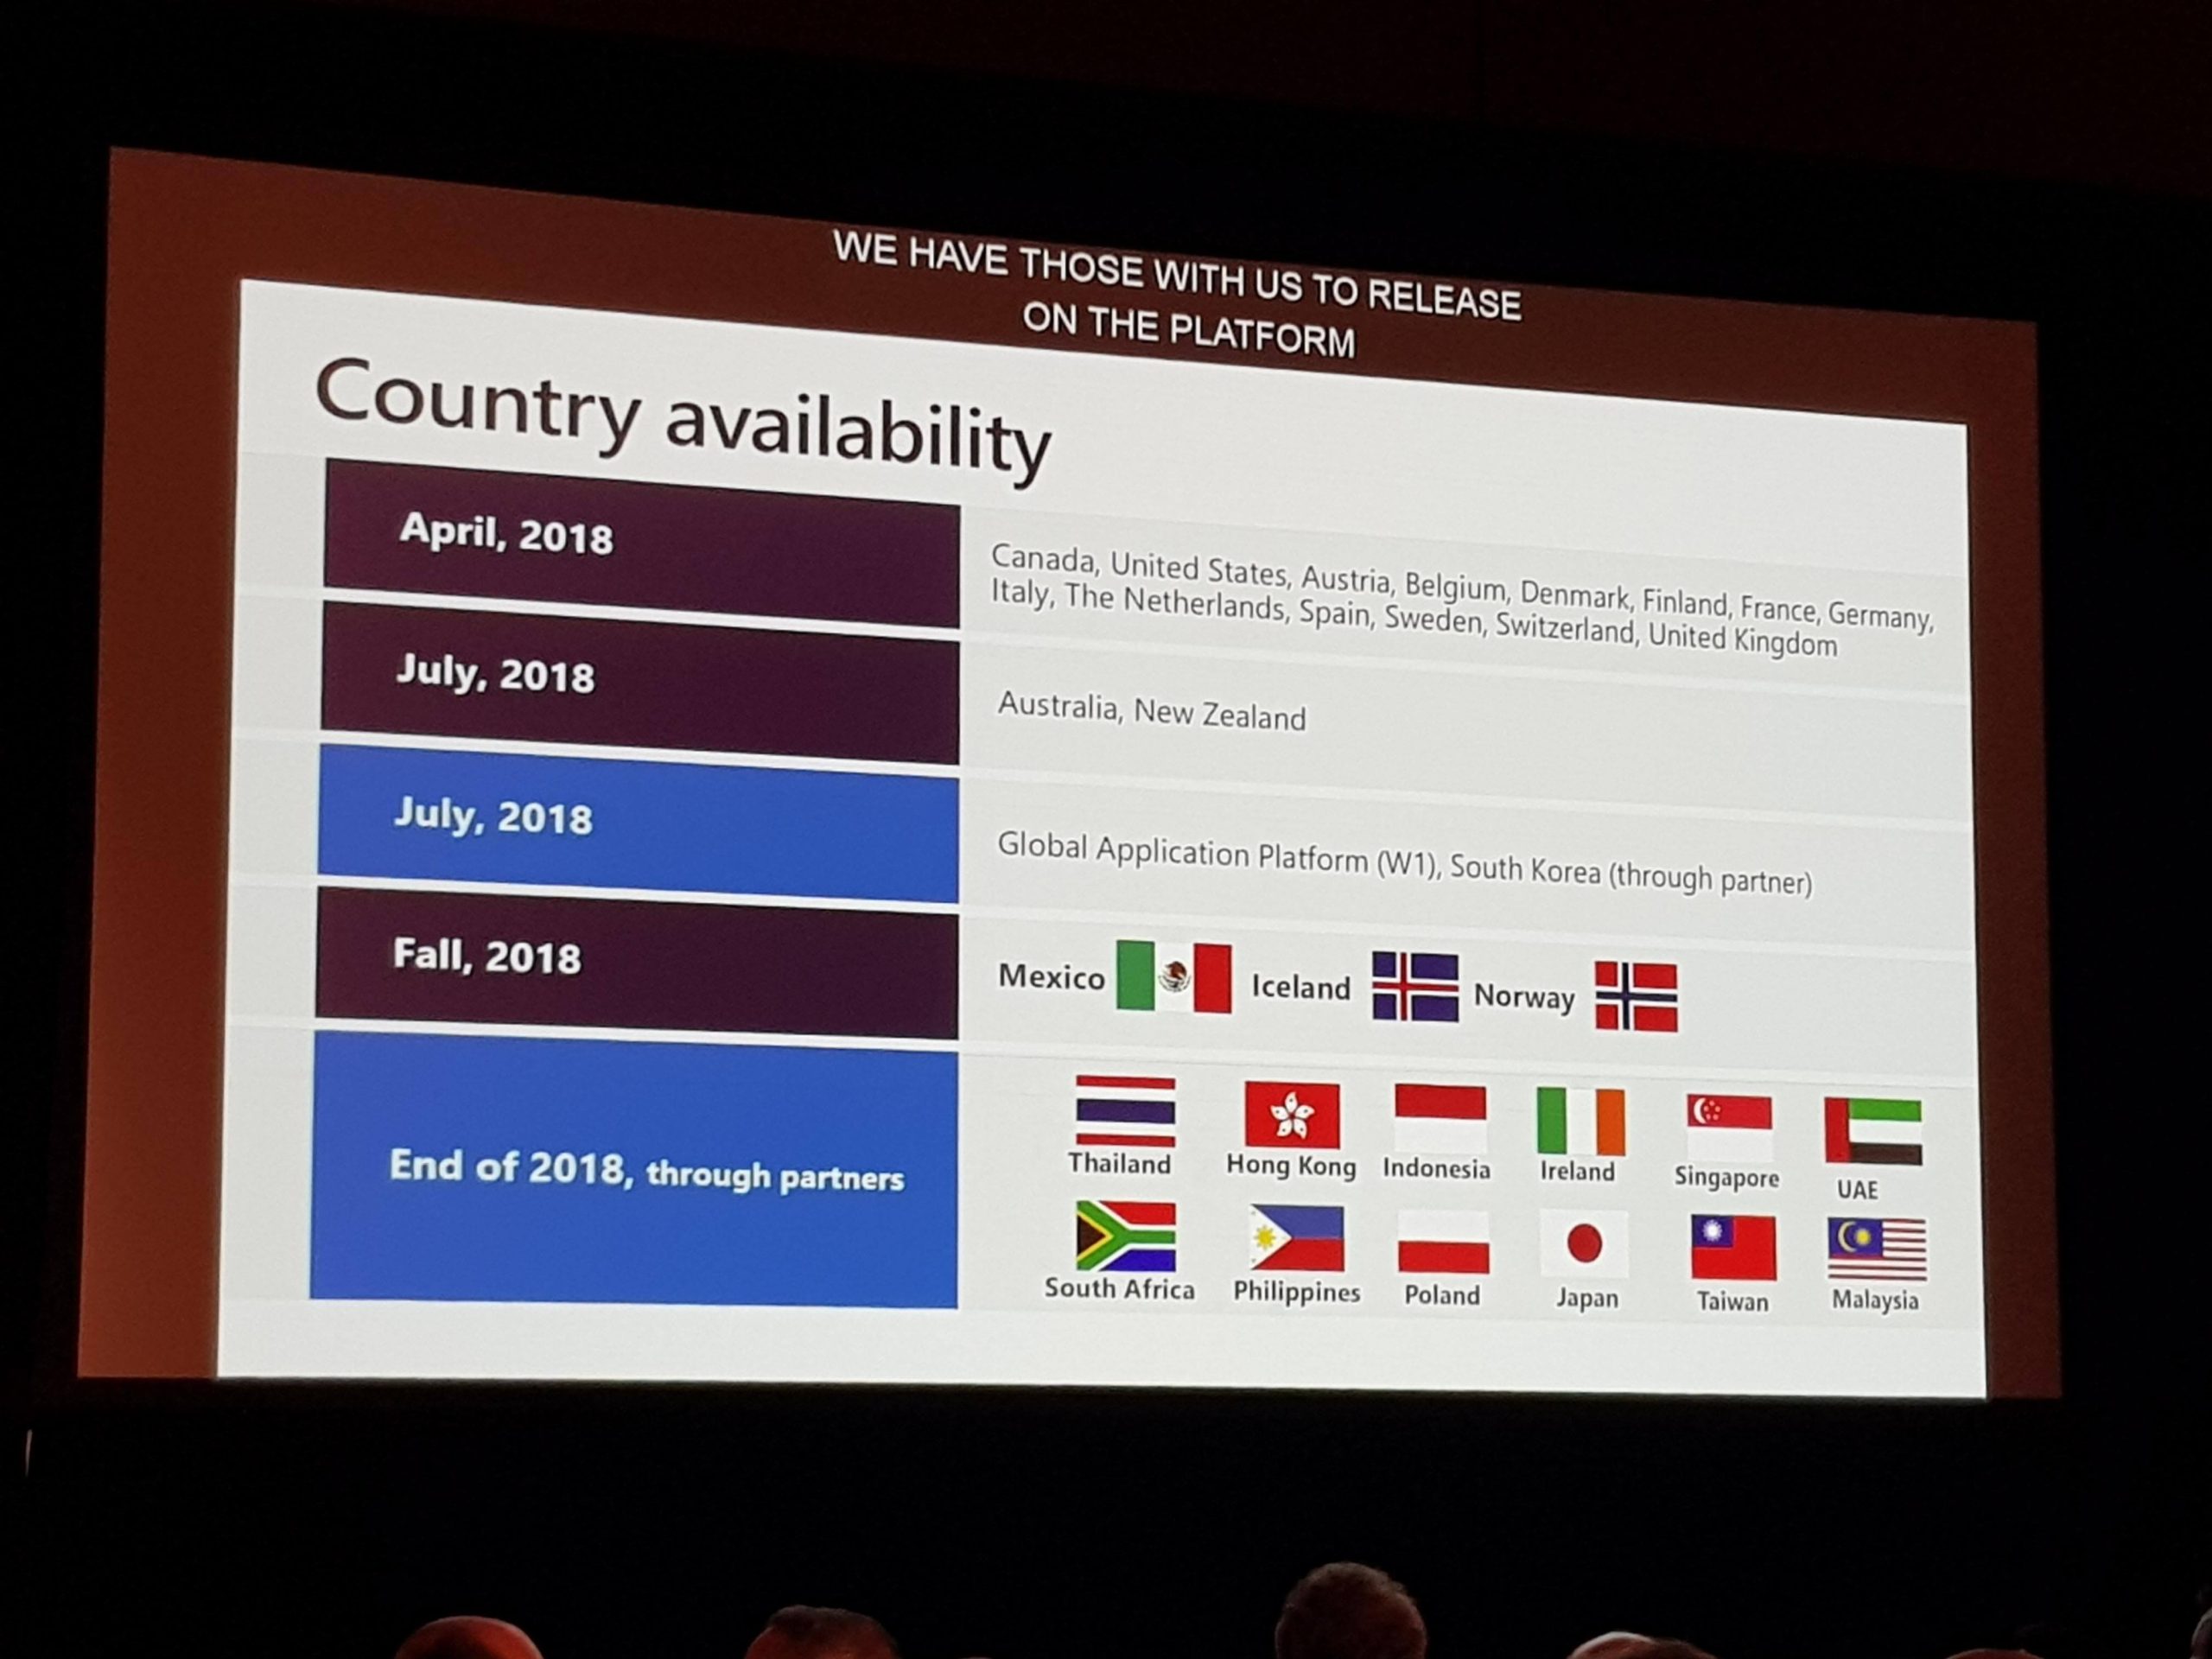 Country availability of Dynamics 365 Business Central